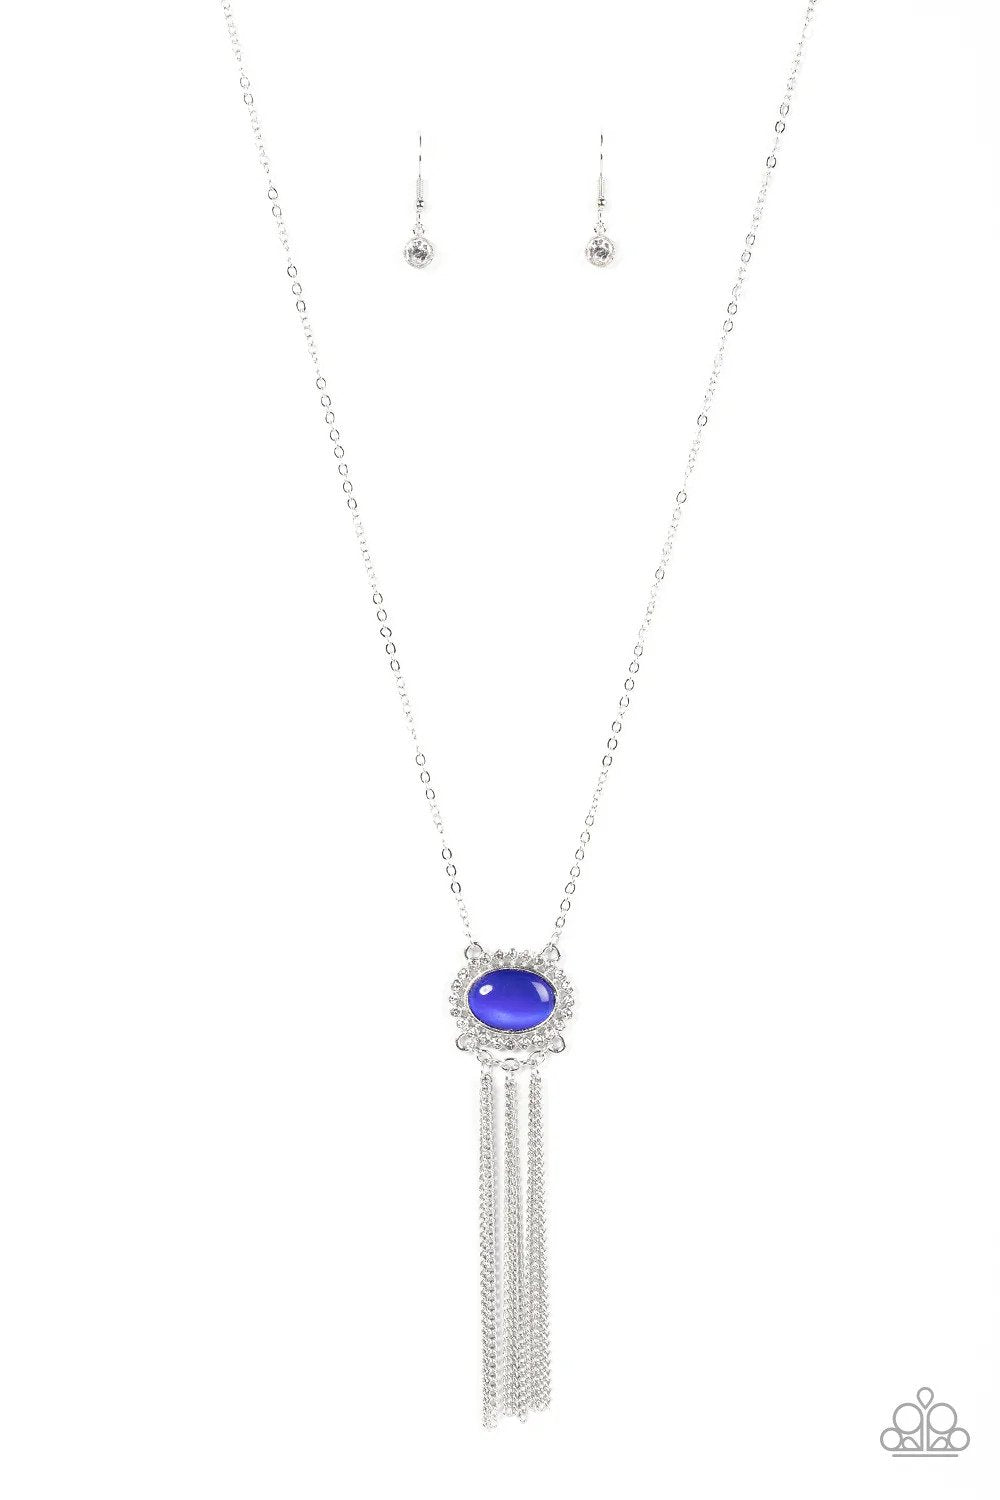 Happily Ever Ethereal Blue Necklace - Paparazzi Accessories- lightbox - CarasShop.com - $5 Jewelry by Cara Jewels